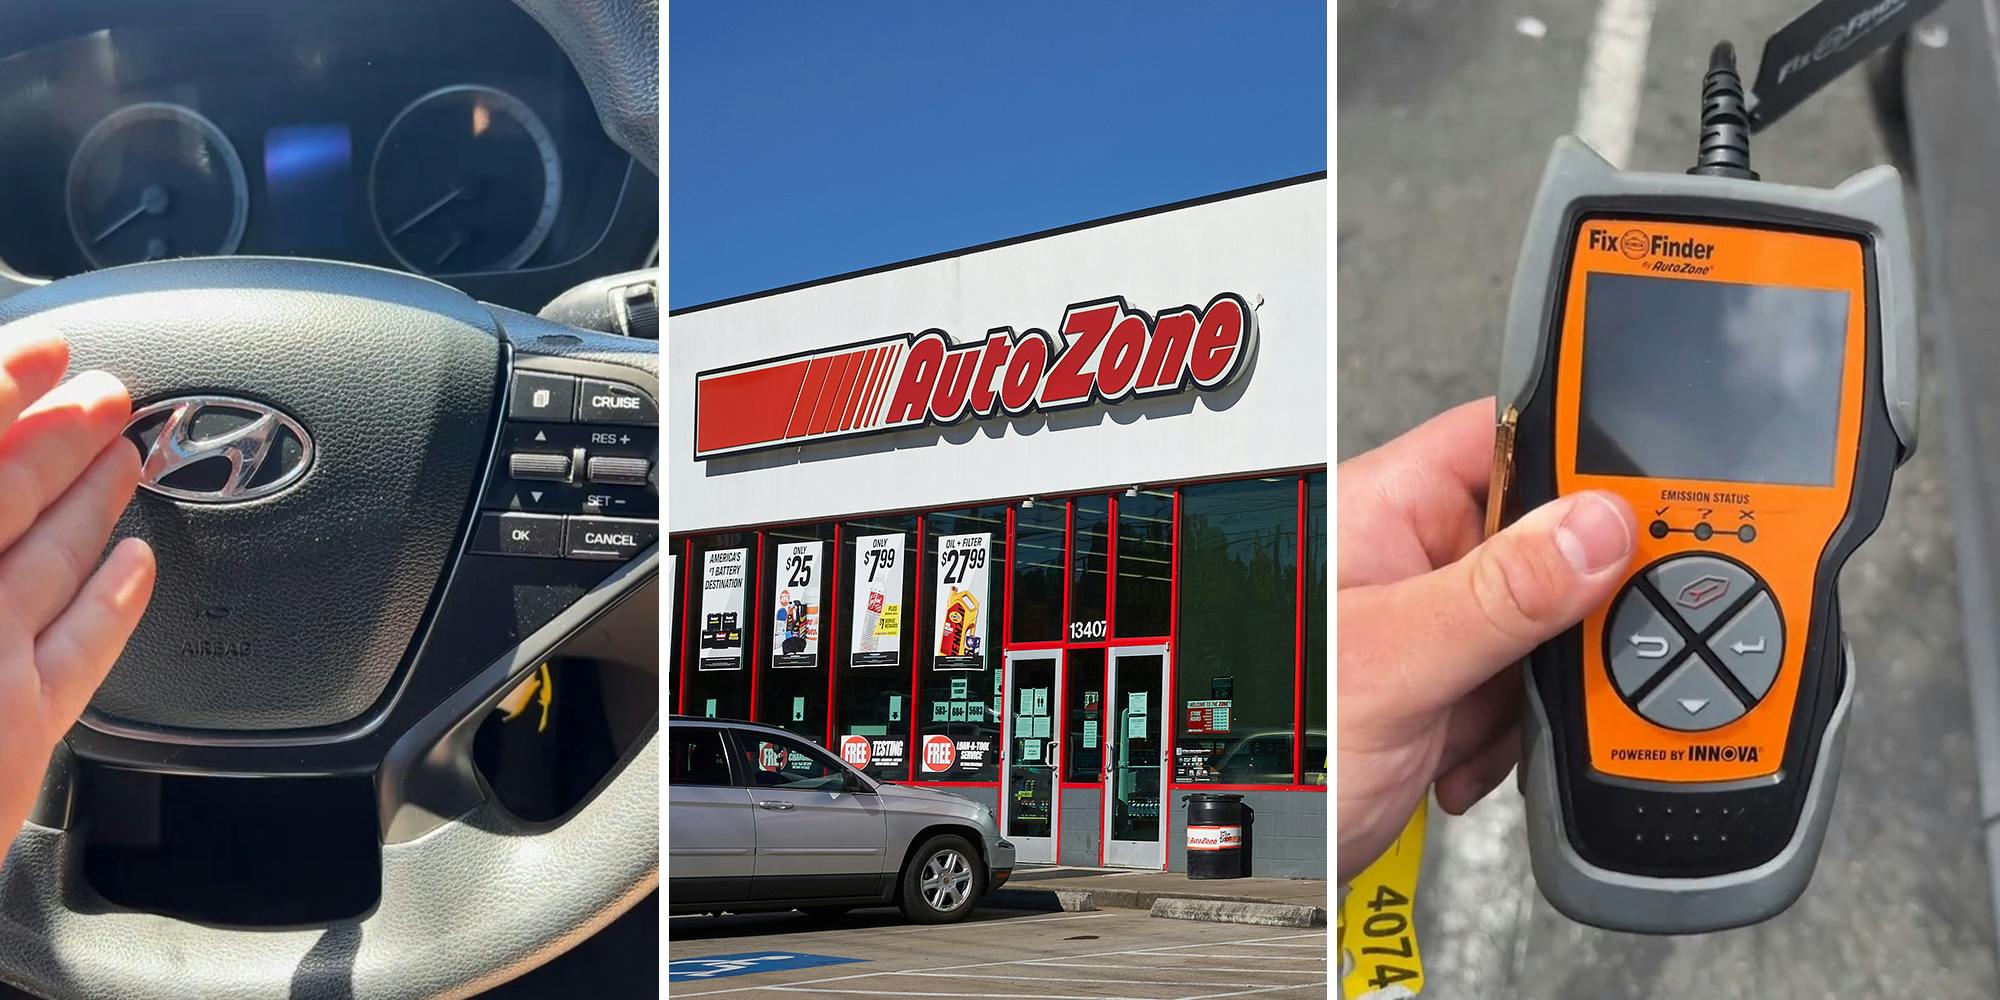 ‘It is idling rough’: AutoZone mechanic shares how to change your ignition coil when the check engine light comes on